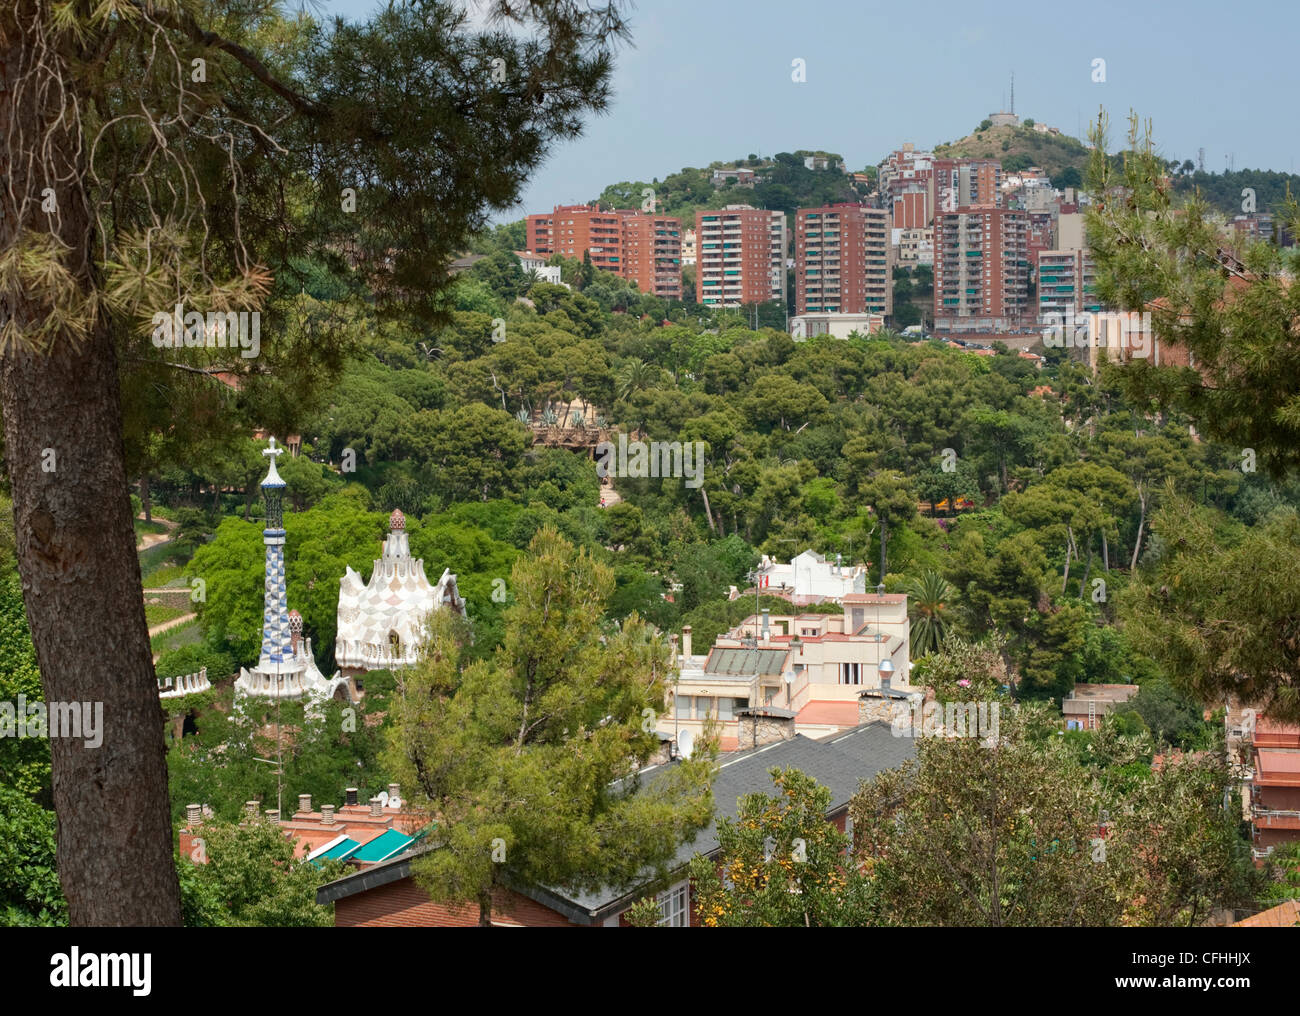 A view of the gardens and buildings in Park Guell, Barcelona Stock Photo